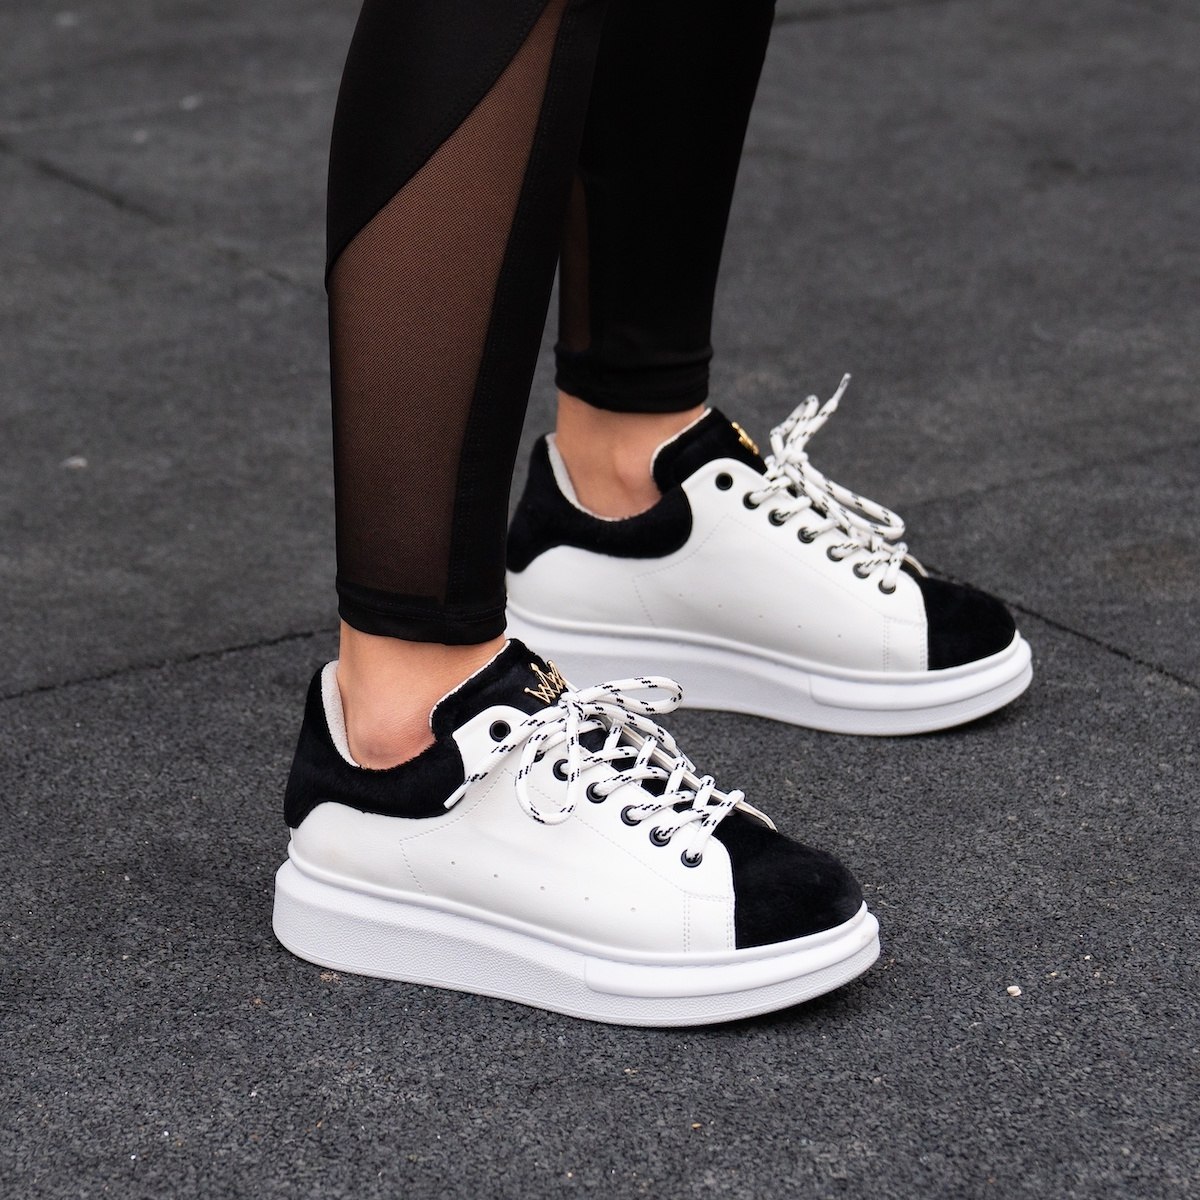 Woman Hype Sole Sneakers in White-Partial Short Black Fur - 1